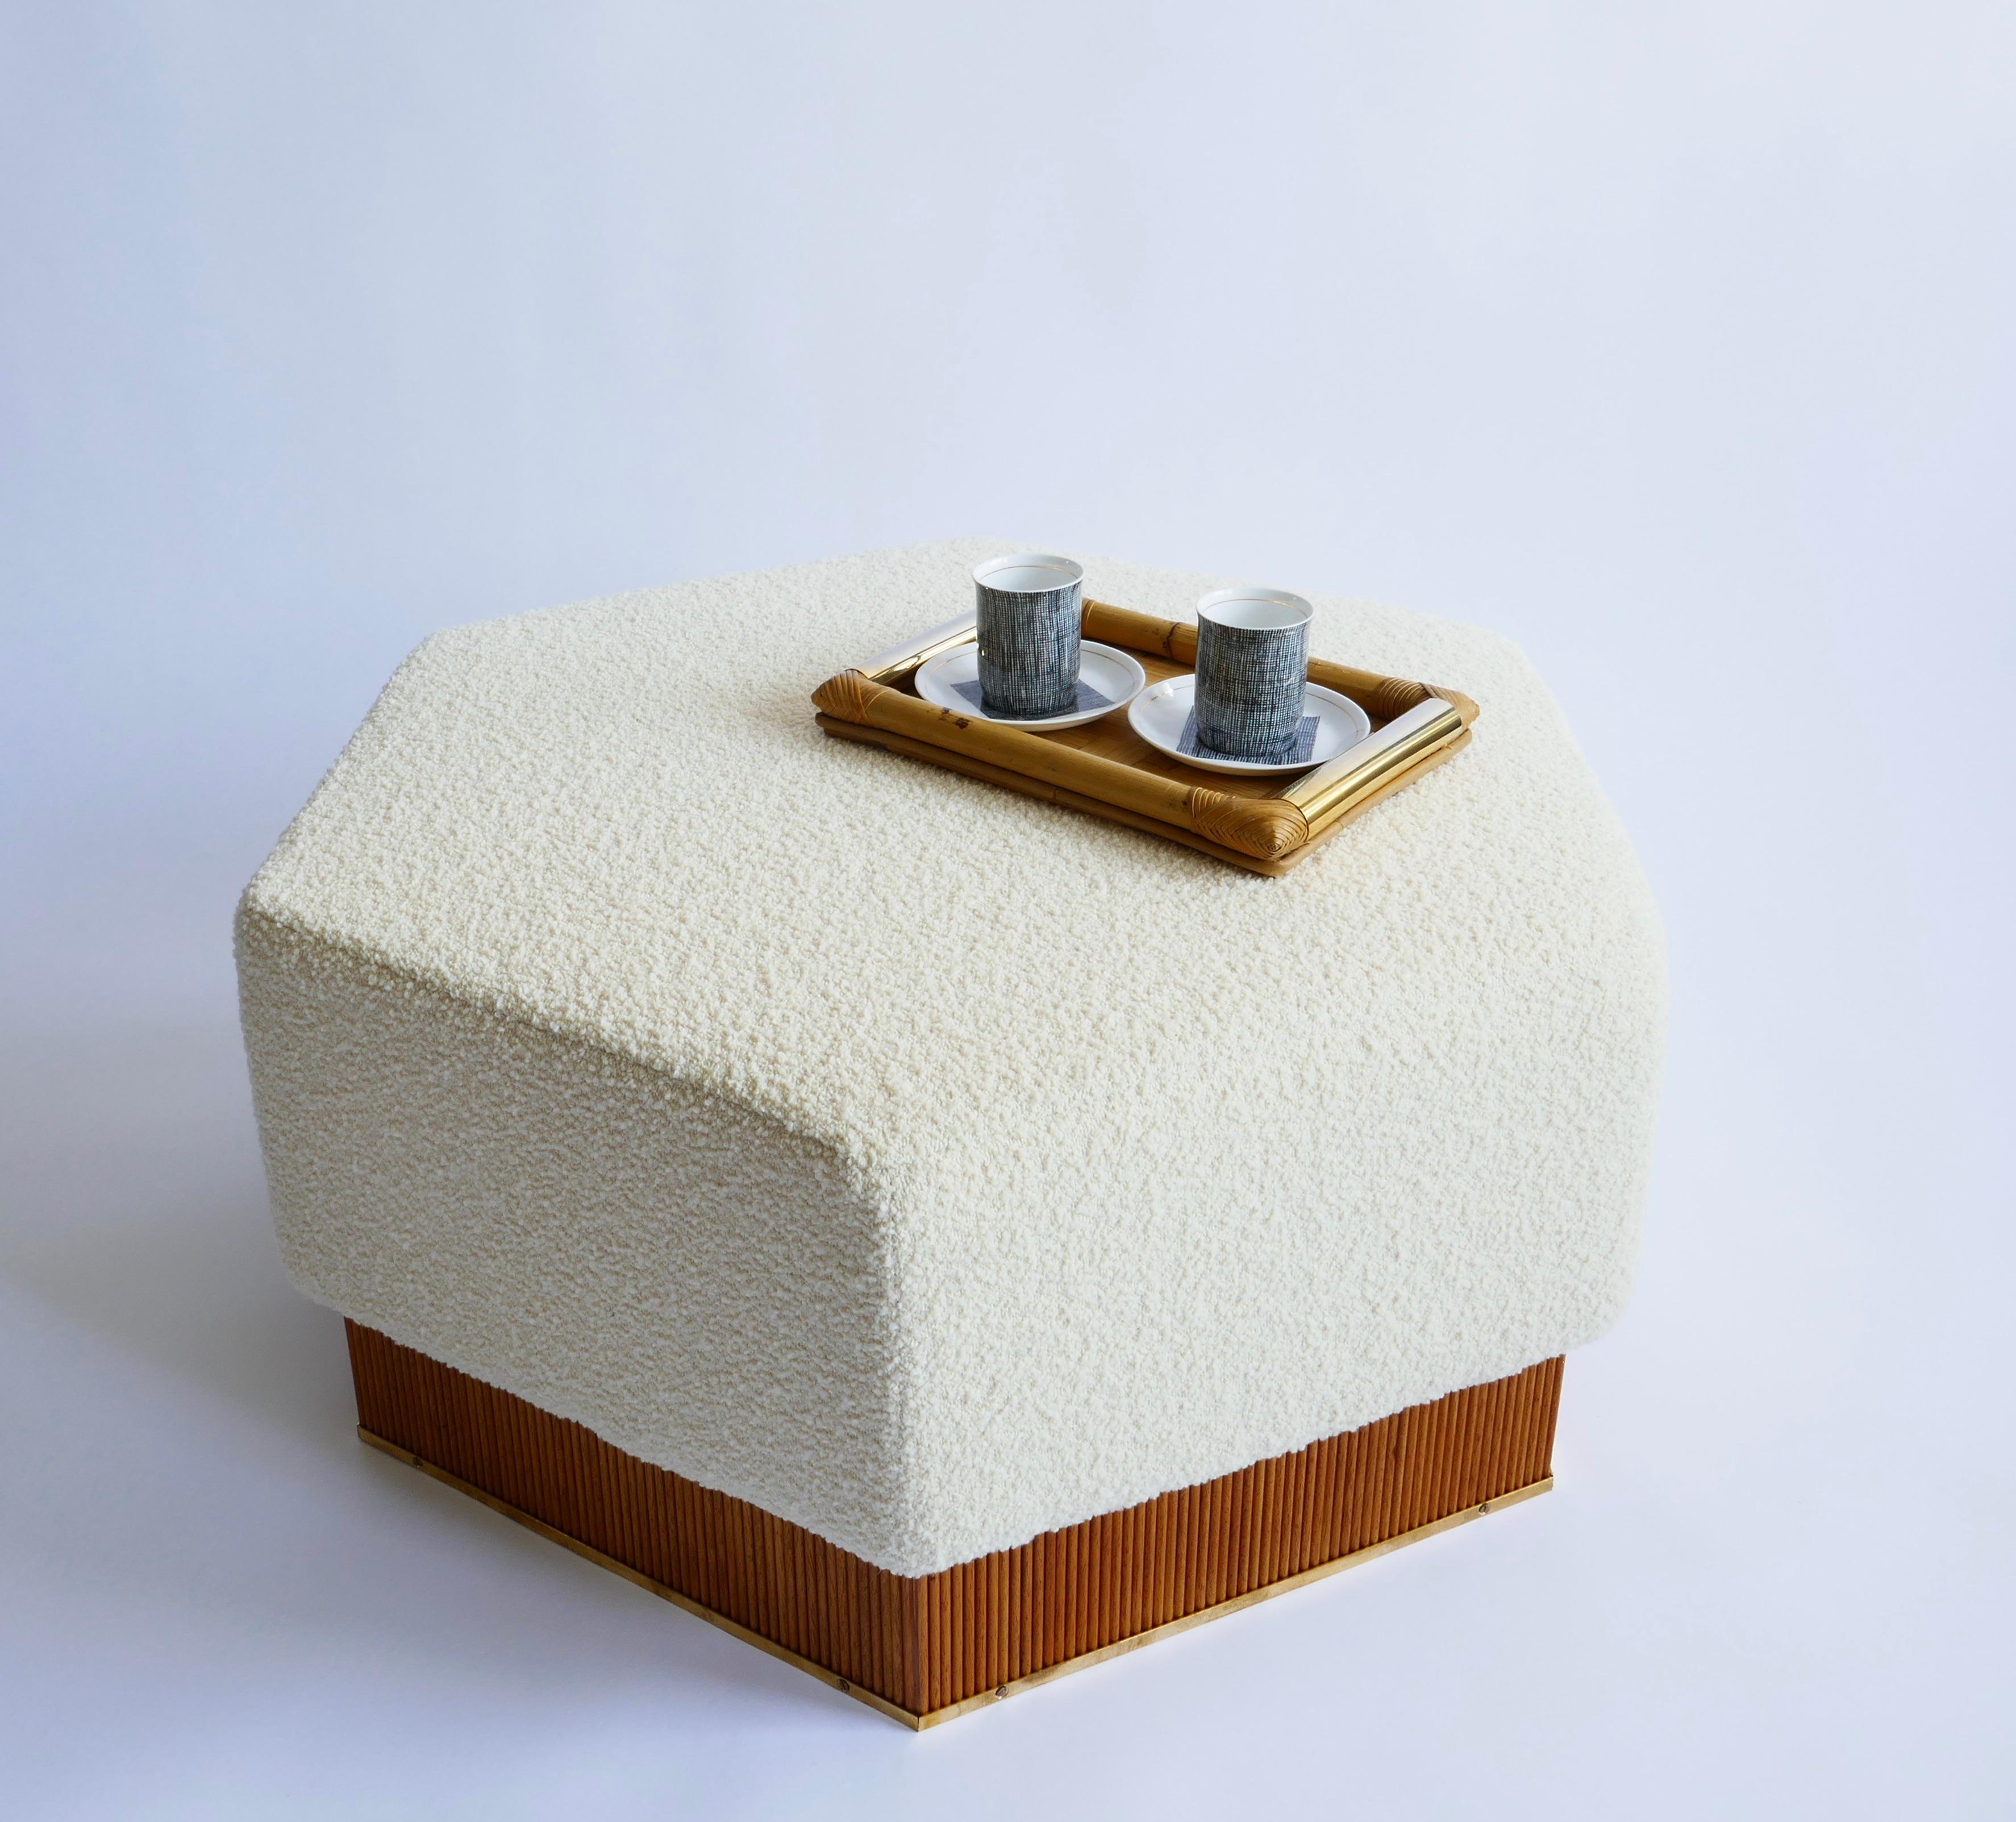 Hexagonal Pouf in Soft White Boucle with Wooden Base, Italy 1